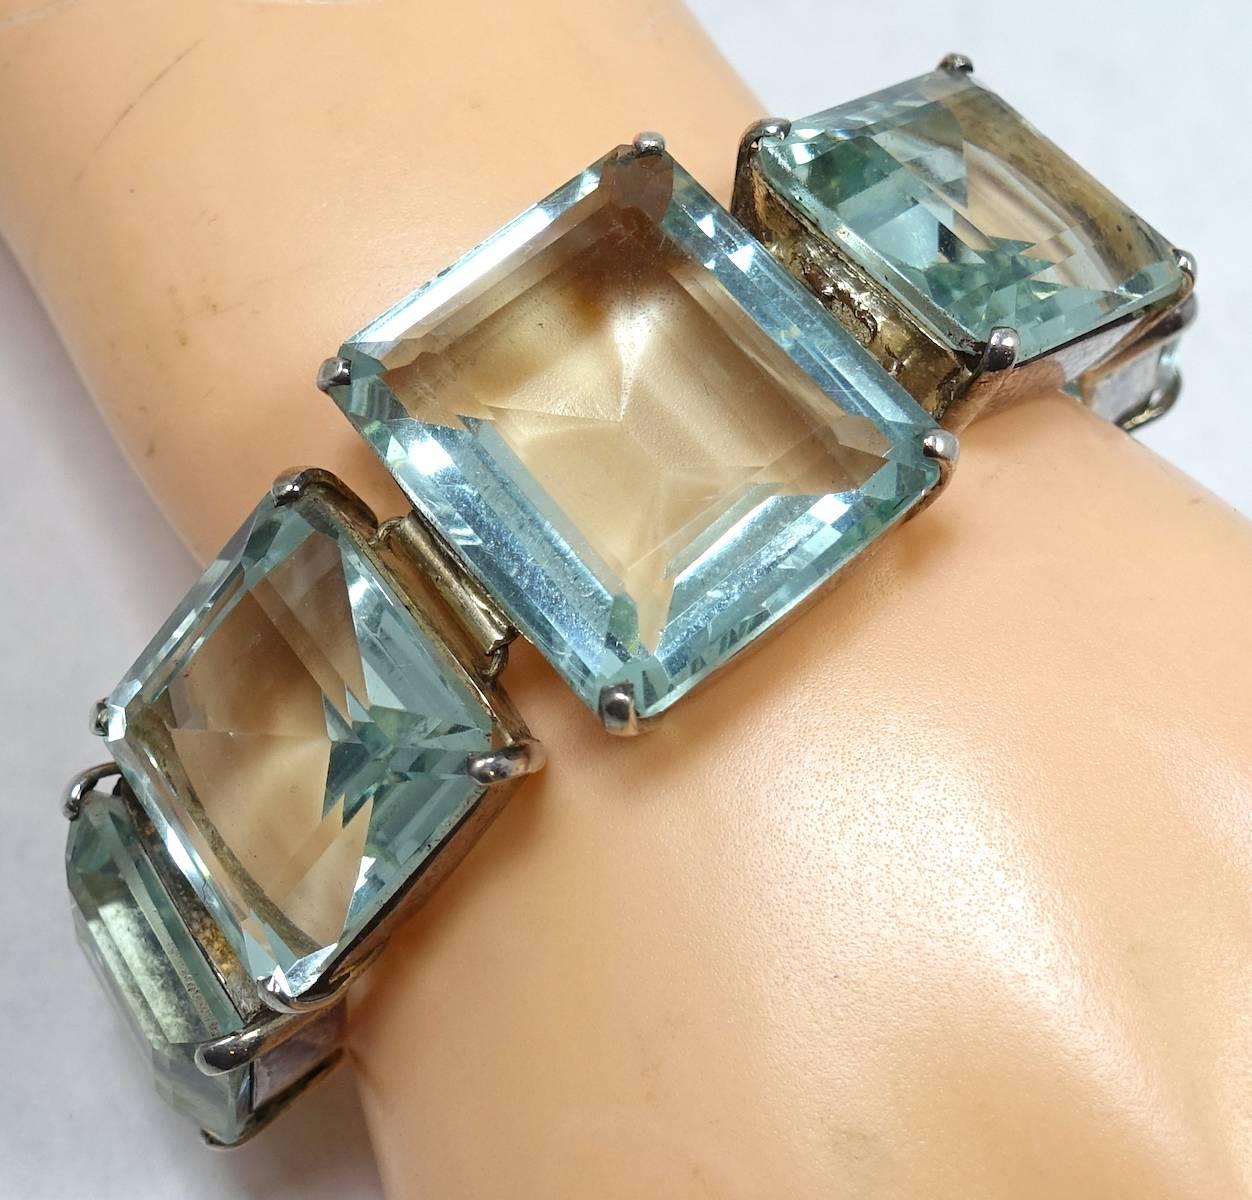 This vintage Deco bracelet features emerald cut aquamarine color crystals in a sterling silver setting.  In excellent condition, this bracelet measures 9-1/4” x 1” and has an adjustable spring closure.